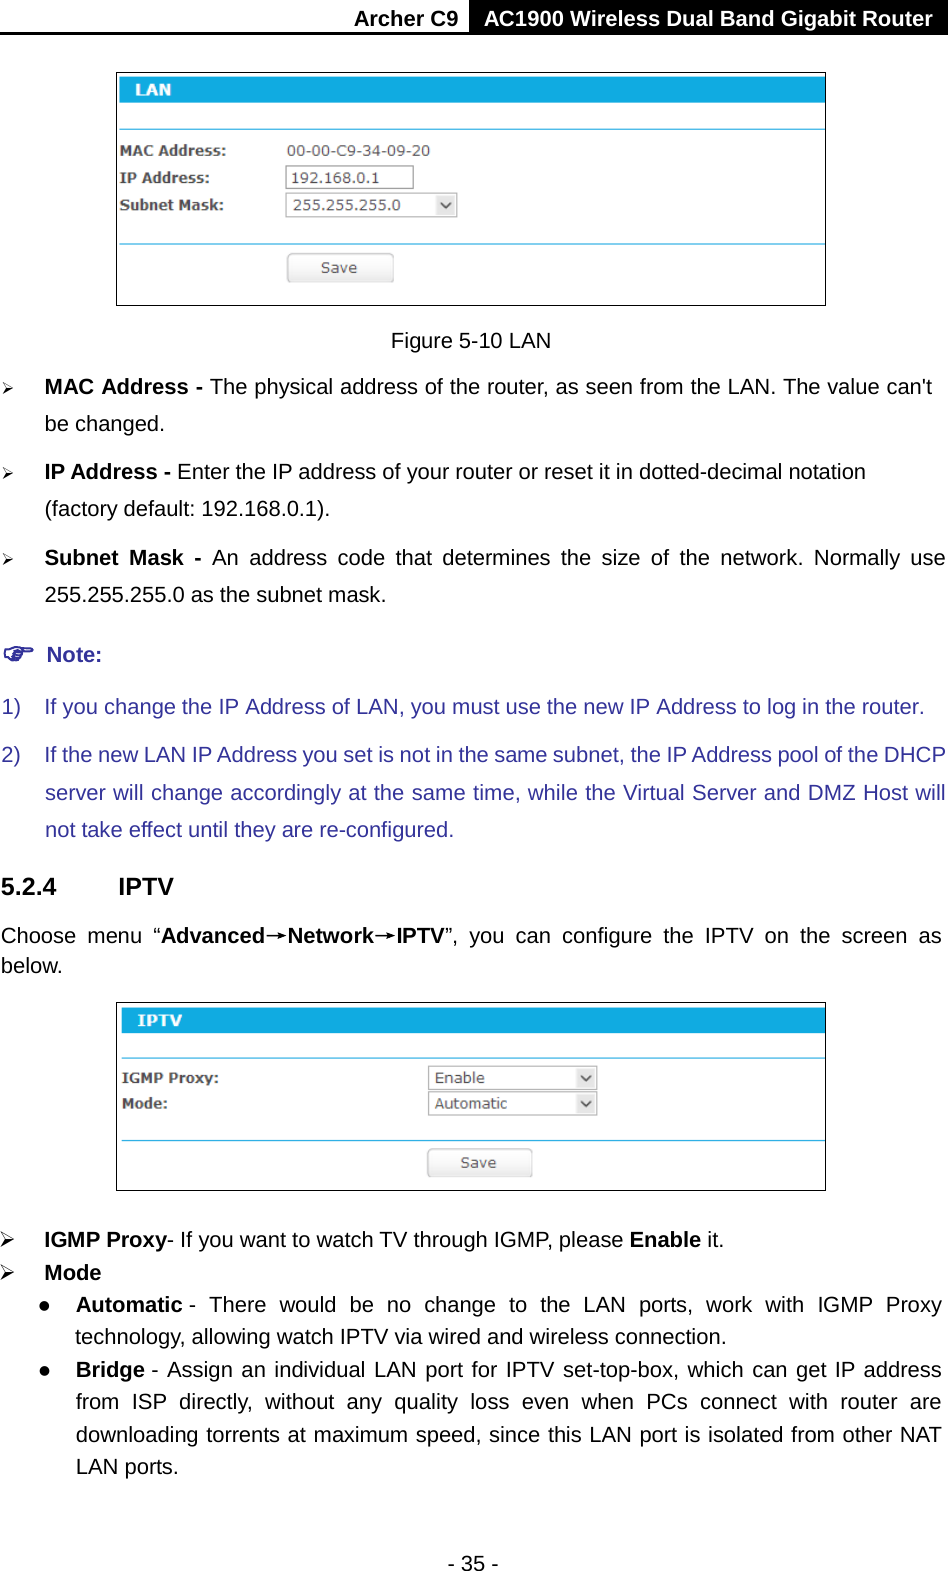 Archer C9 AC1900 Wireless Dual Band Gigabit Router   Figure 5-10 LAN  MAC Address - The physical address of the router, as seen from the LAN. The value can&apos;t be changed.  IP Address - Enter the IP address of your router or reset it in dotted-decimal notation (factory default: 192.168.0.1).  Subnet Mask - An address code that determines the size of the network. Normally use 255.255.255.0 as the subnet mask.    Note: 1) If you change the IP Address of LAN, you must use the new IP Address to log in the router.   2) If the new LAN IP Address you set is not in the same subnet, the IP Address pool of the DHCP server will change accordingly at the same time, while the Virtual Server and DMZ Host will not take effect until they are re-configured. 5.2.4 IPTV Choose menu “Advanced→Network→IPTV”, you can configure the IPTV  on the screen as below.   IGMP Proxy- If you want to watch TV through IGMP, please Enable it.  Mode  Automatic -  There would be no change to the LAN ports, work with IGMP Proxy technology, allowing watch IPTV via wired and wireless connection.  Bridge - Assign an individual LAN port for IPTV set-top-box, which can get IP address from ISP directly, without any quality loss even when PCs connect with router are downloading torrents at maximum speed, since this LAN port is isolated from other NAT LAN ports. - 35 - 